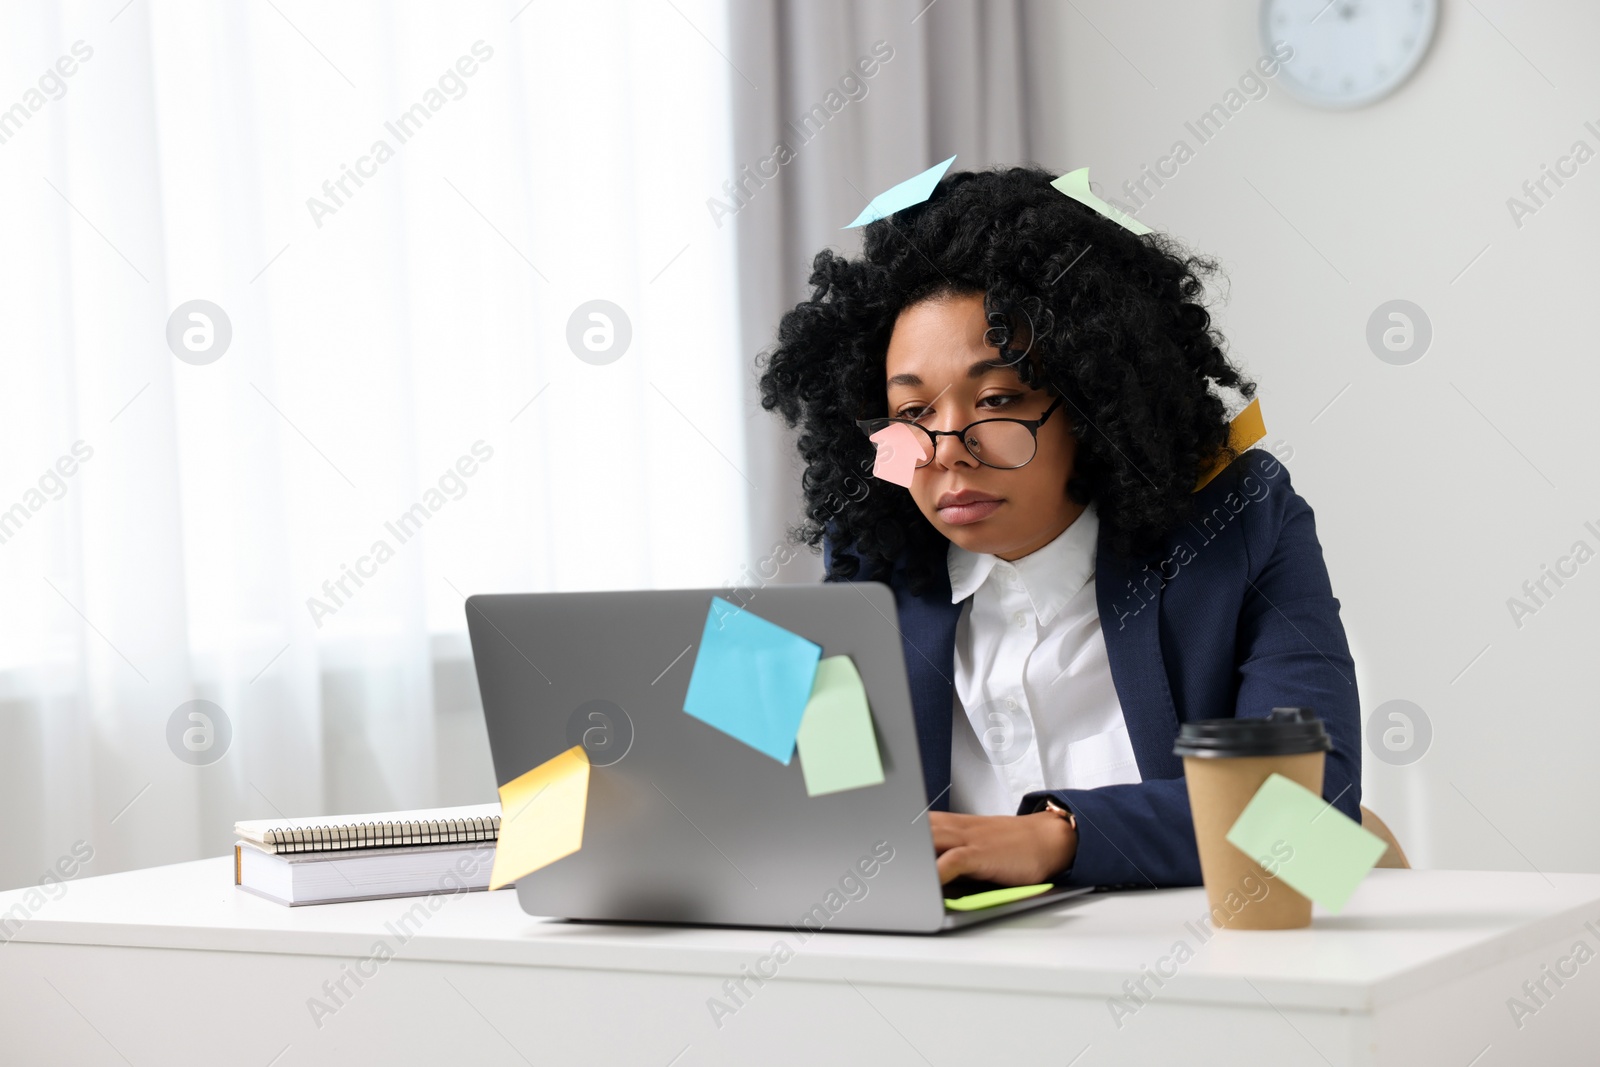 Photo of Deadline concept. Tired woman working with laptop in office, space for text. Many sticky notes everywhere as reminders